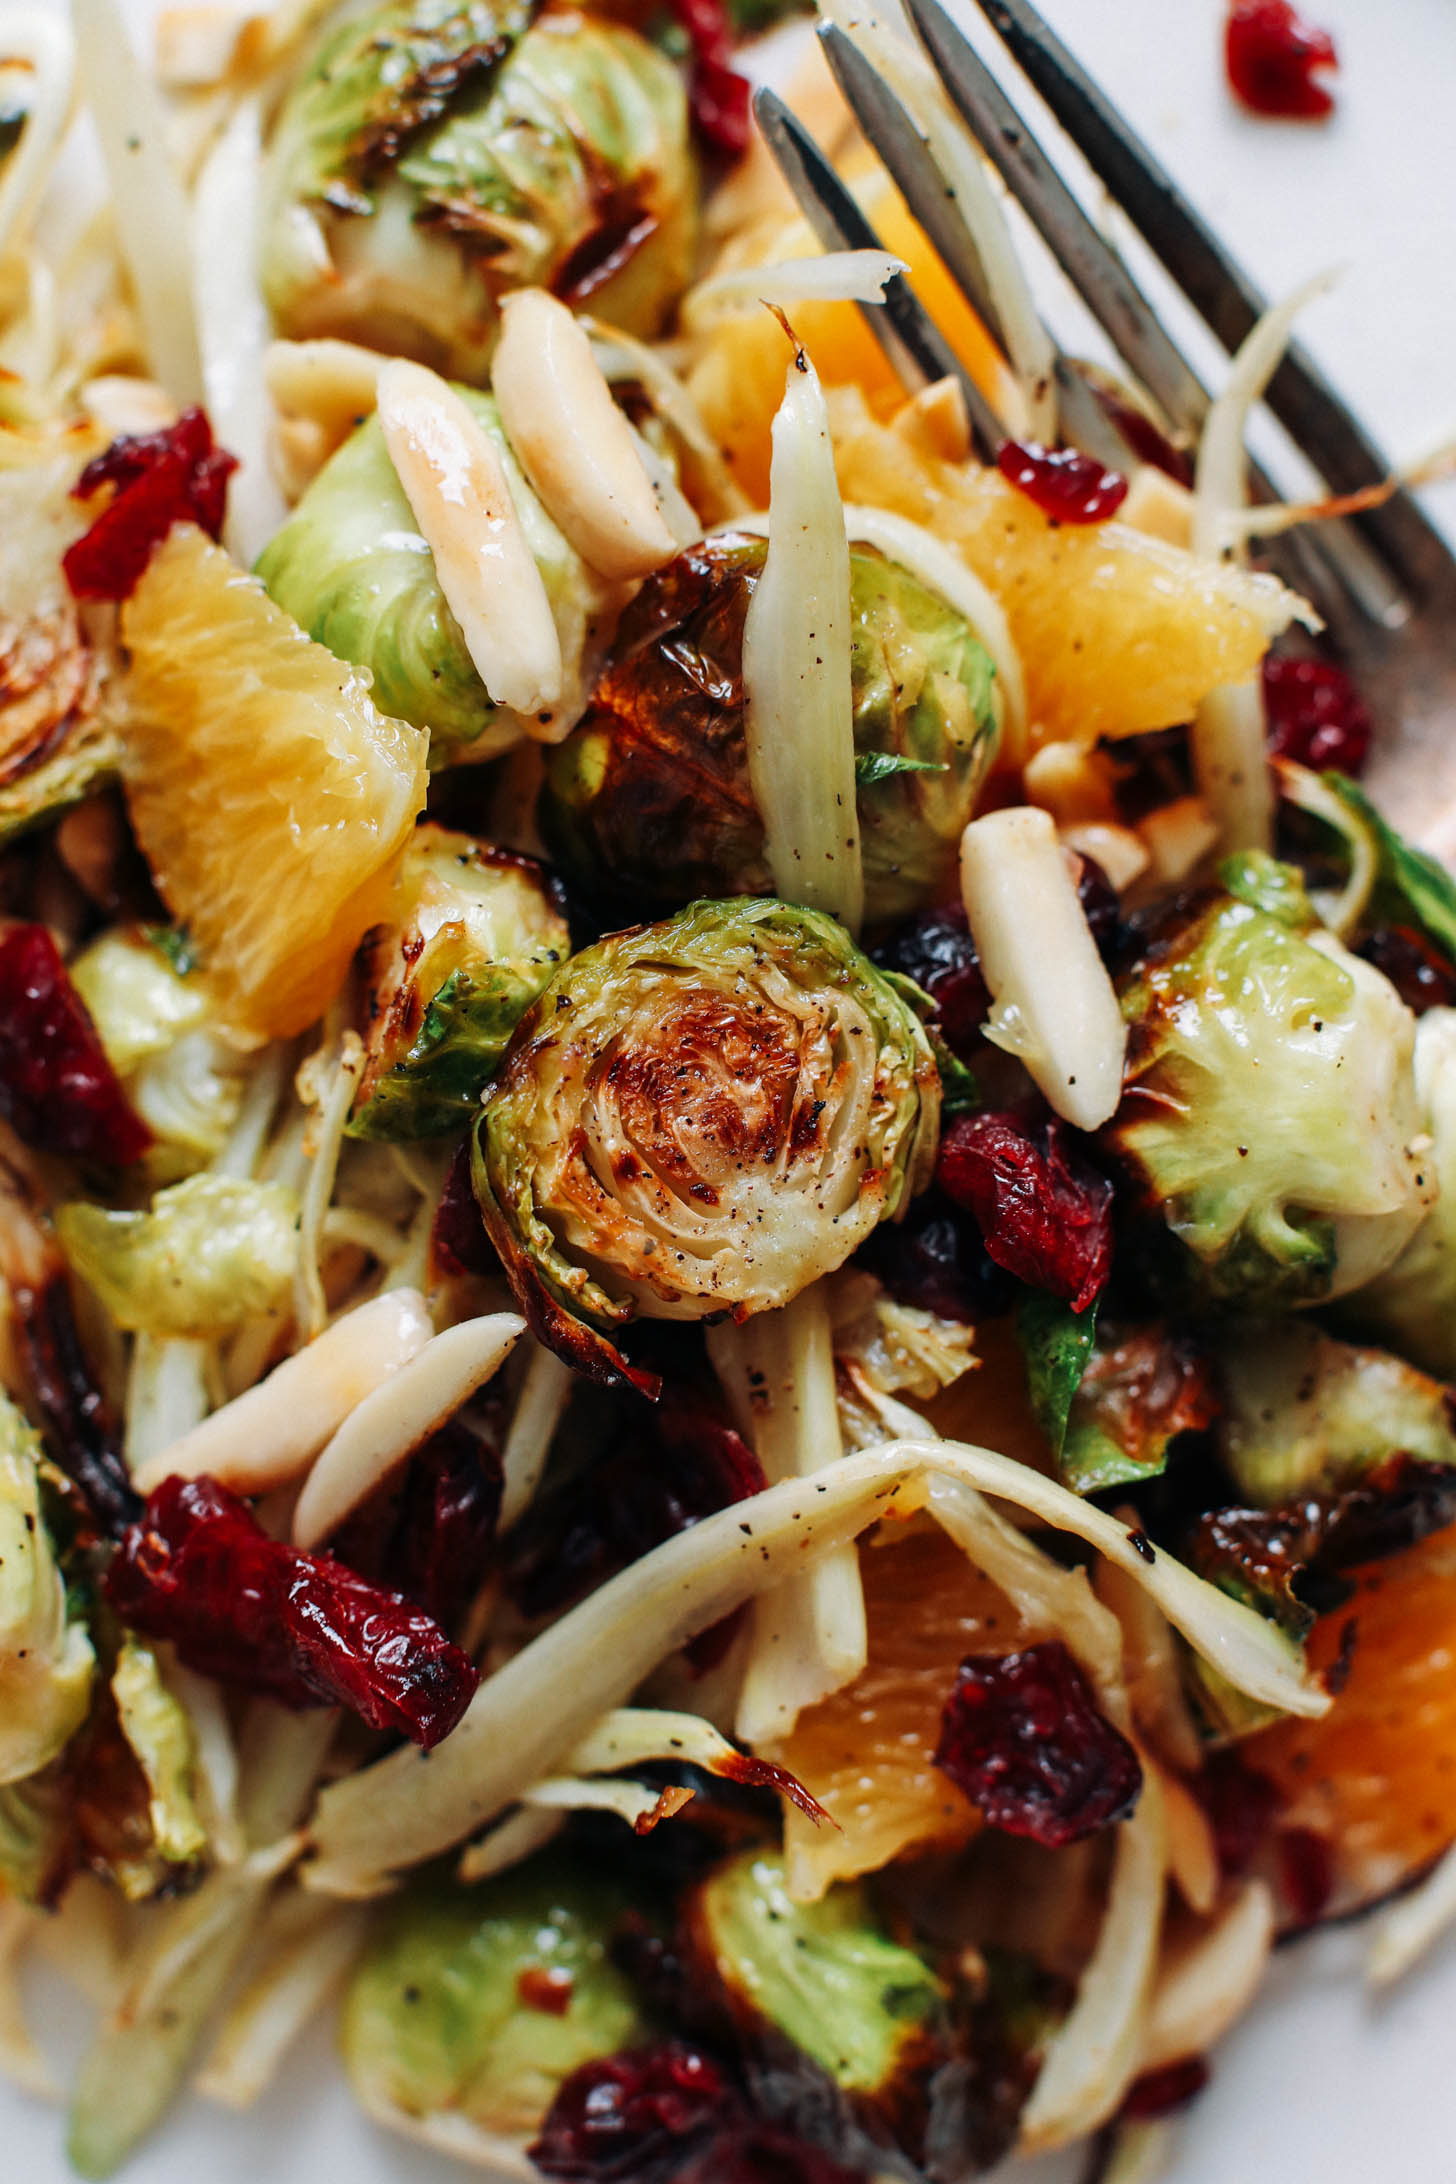 Close up shot of a plate of roasted brussels sprouts and fennel tossed with almonds, cranberries, orange, and dressing